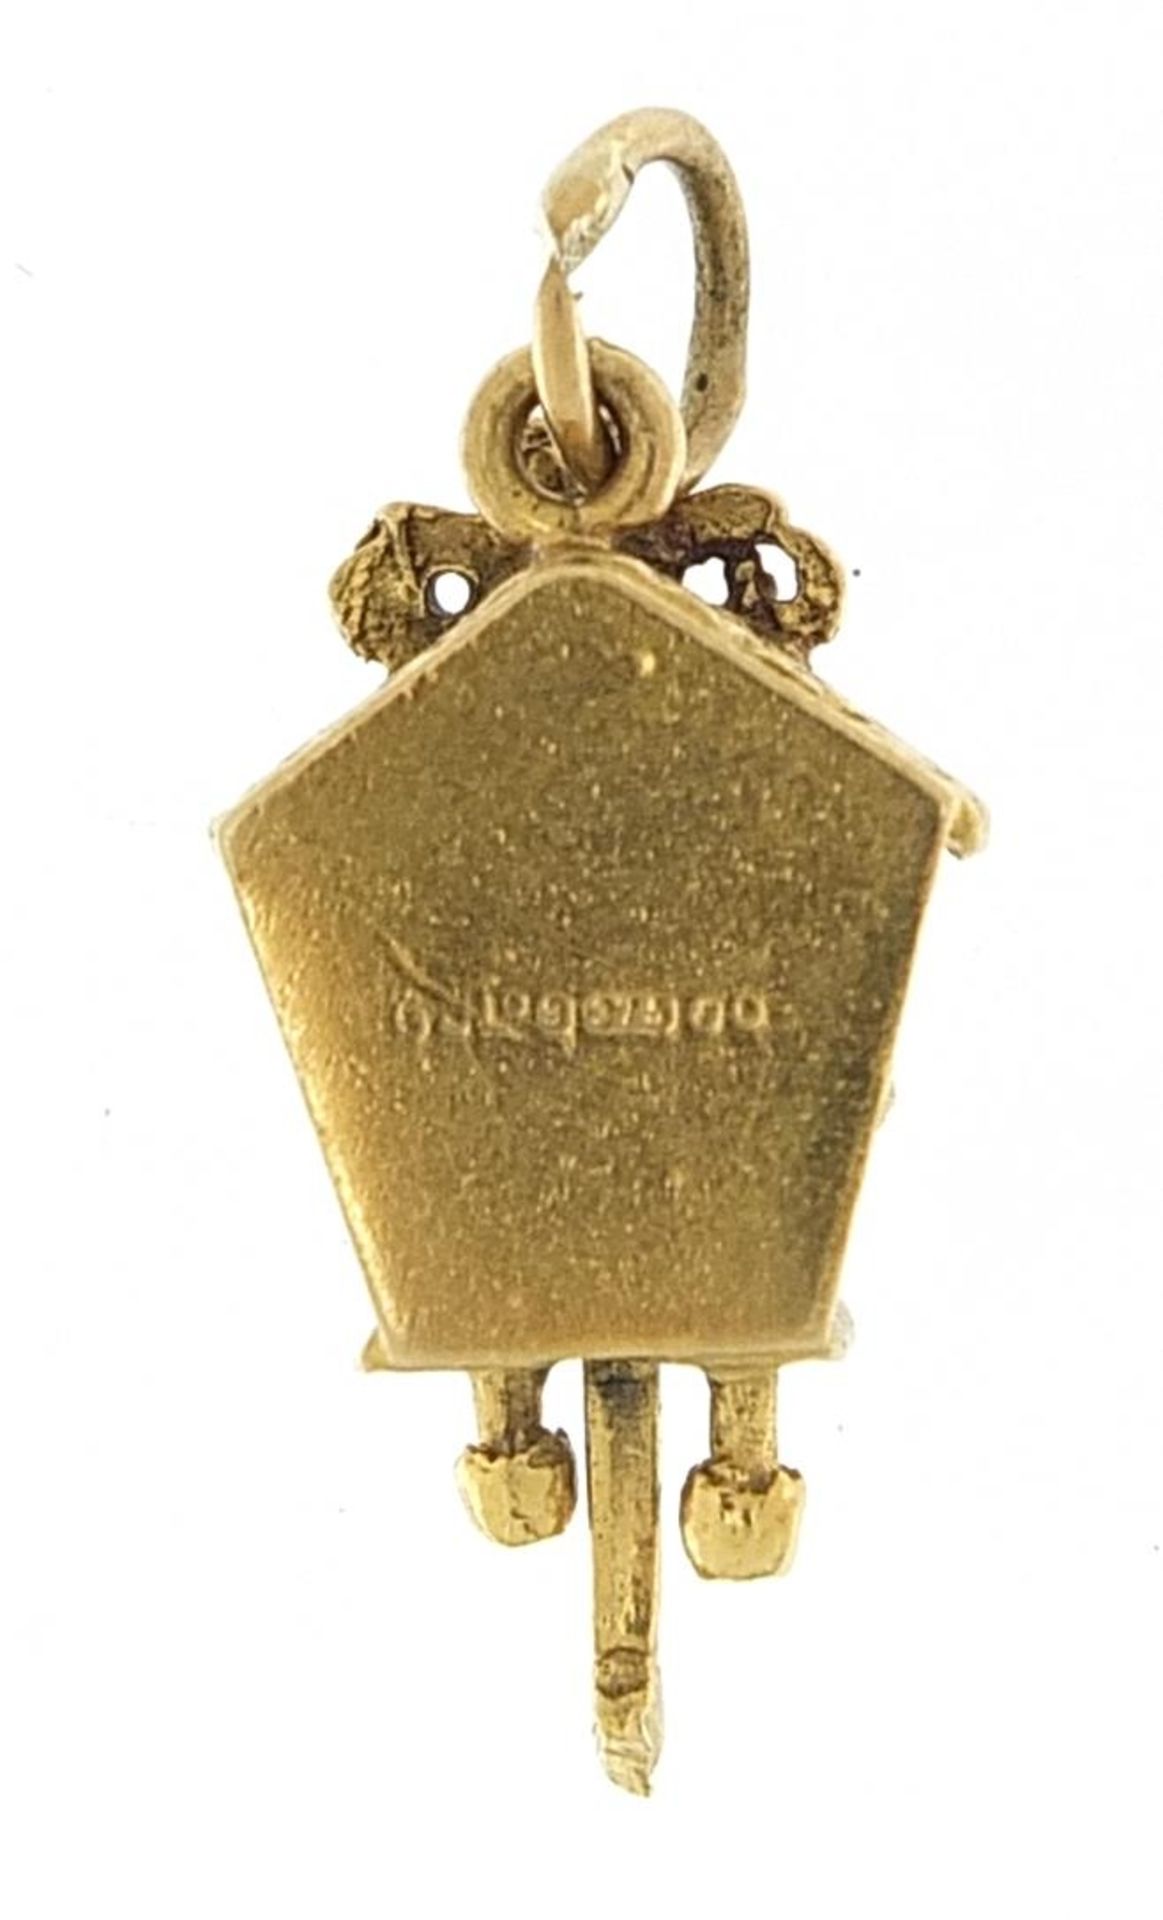 9ct gold and enamel cuckoo clock charm, 2.1cm high, 2.6g - Image 2 of 3